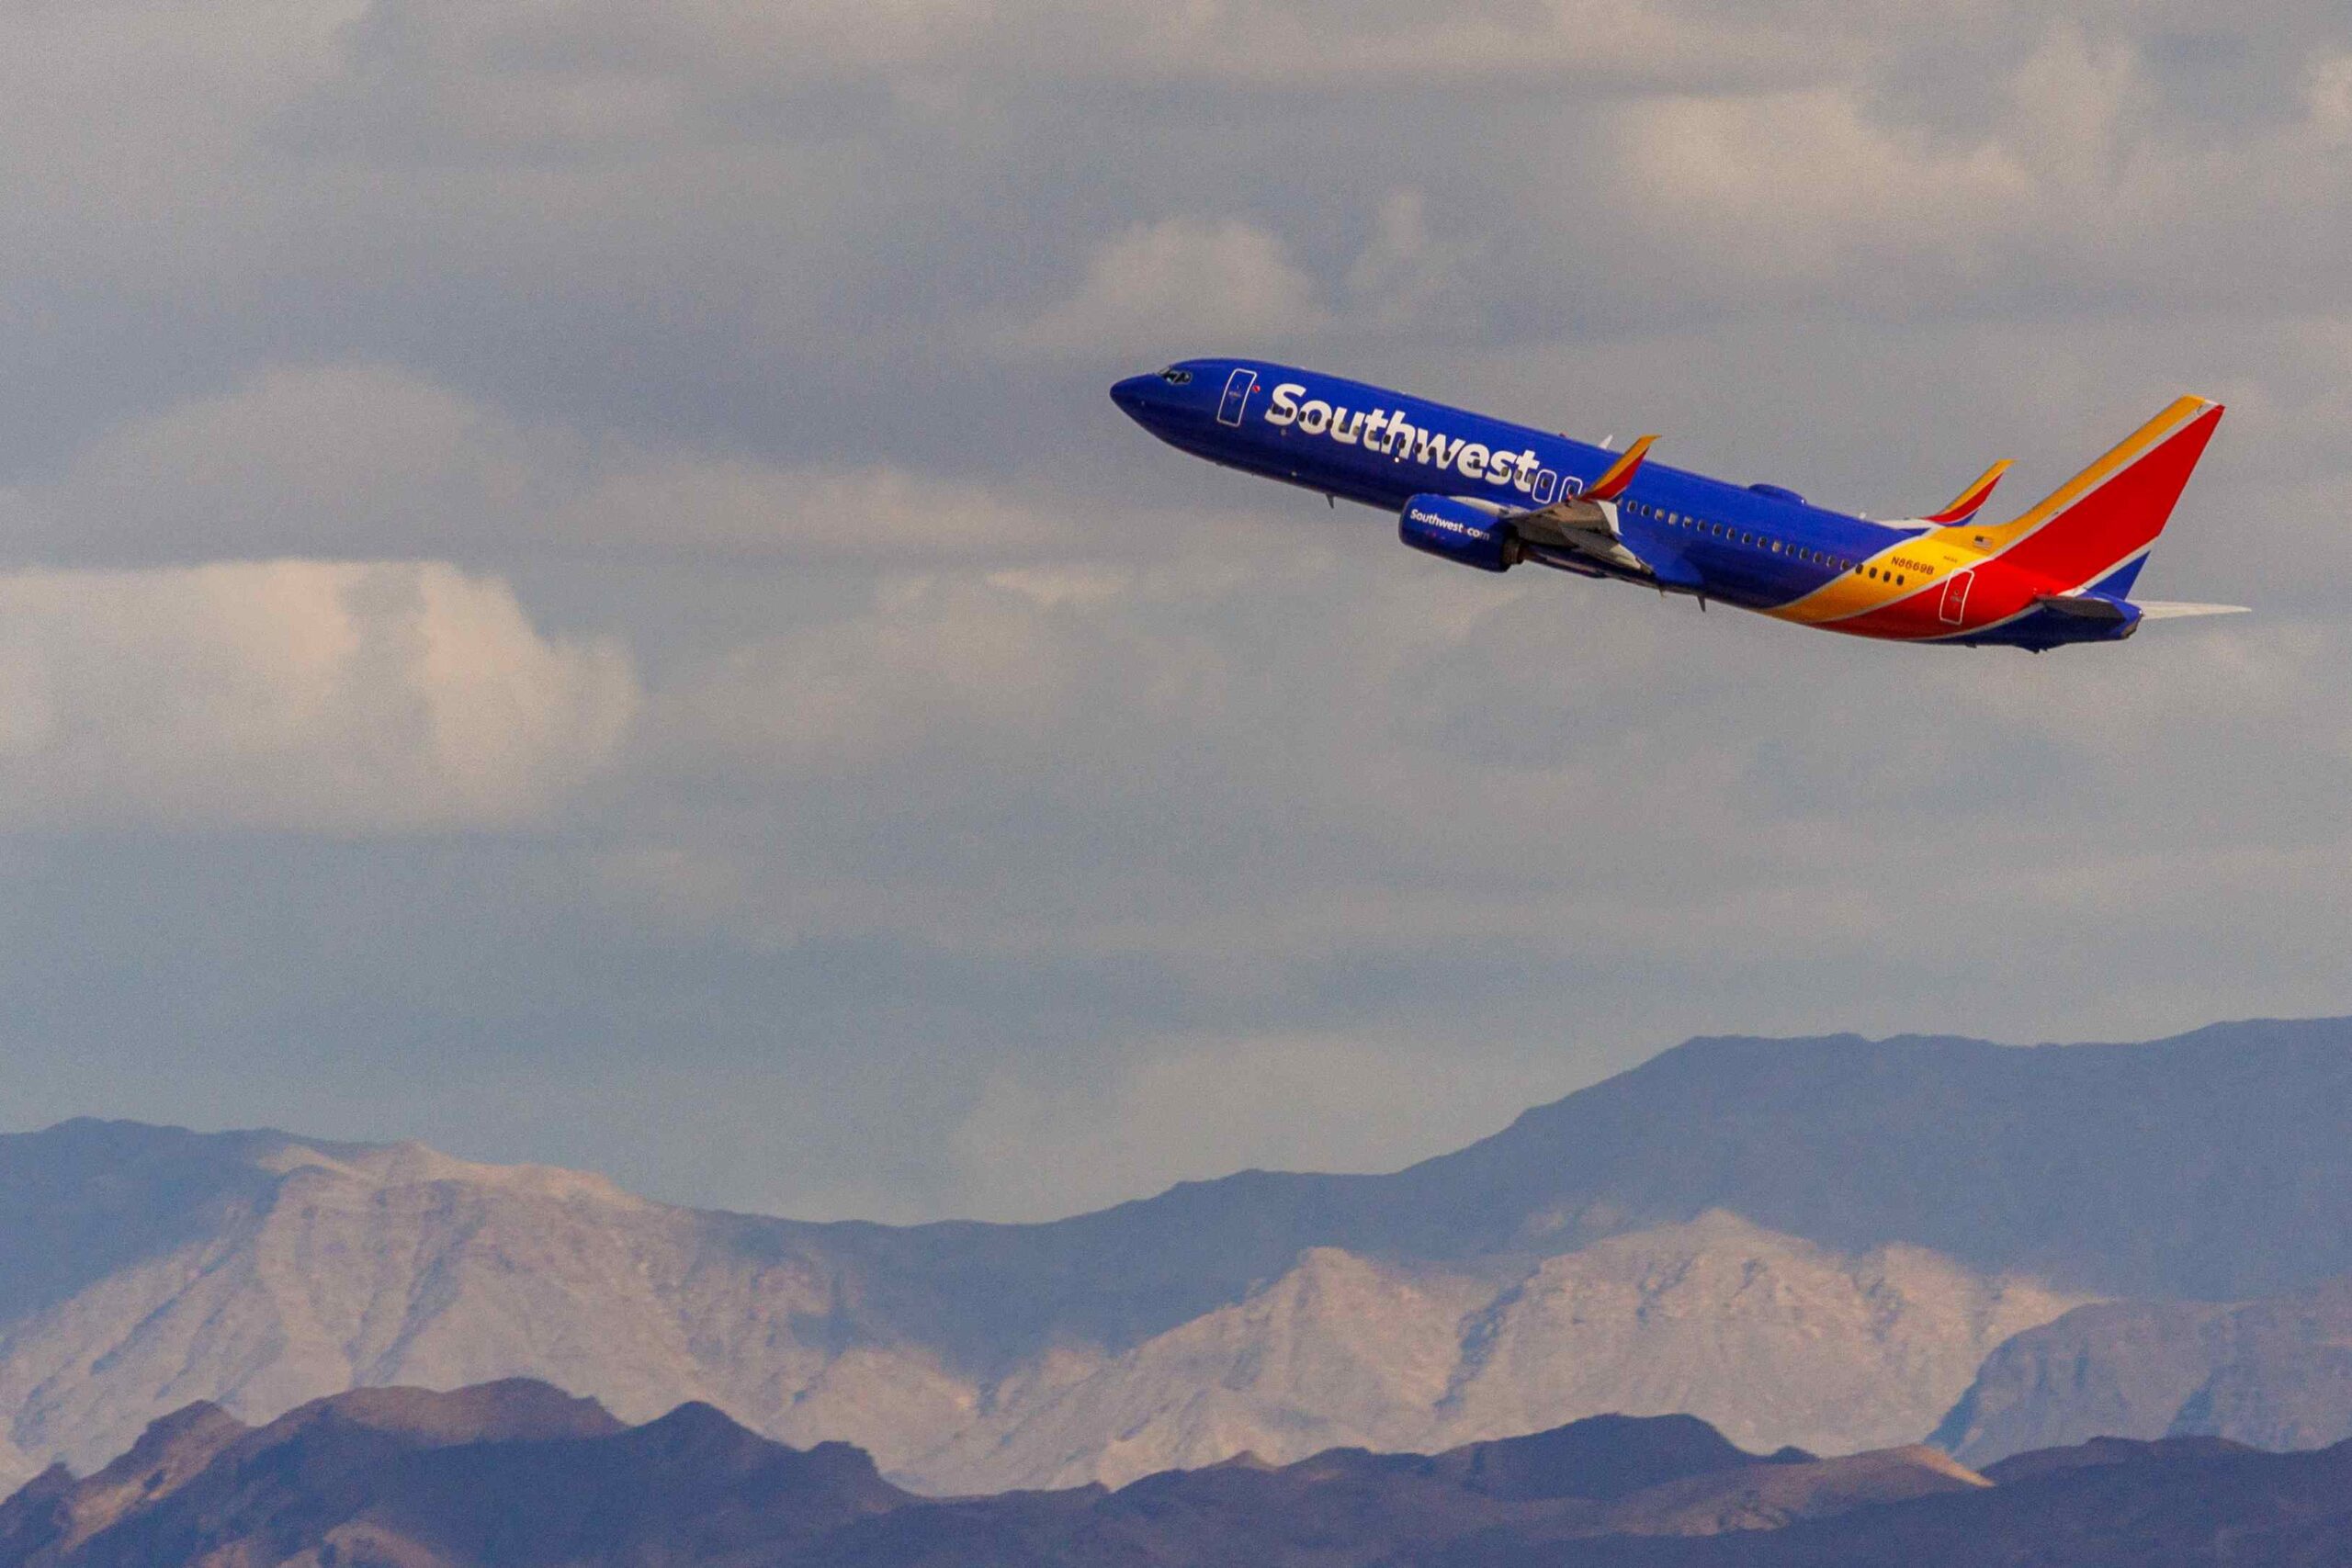 Southwest cuts delivery forecast from Boeing